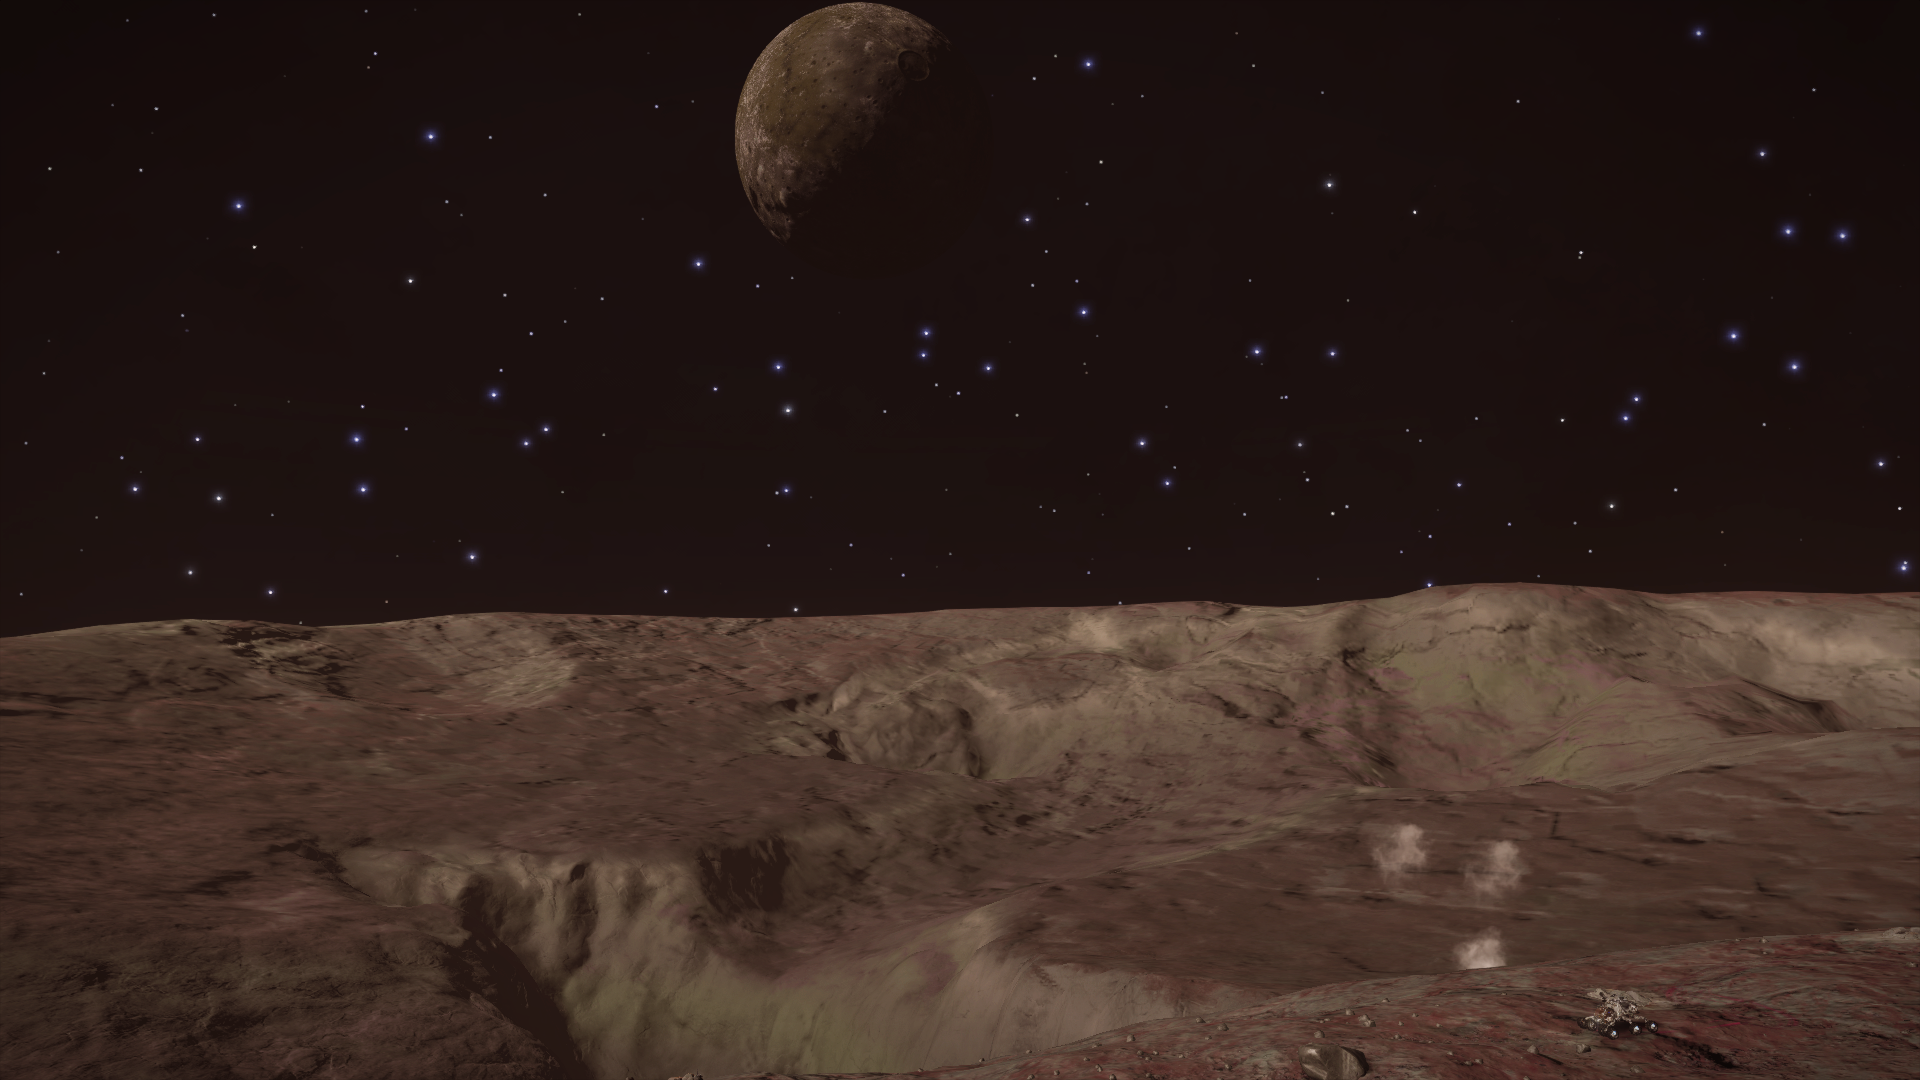 View on its host planet